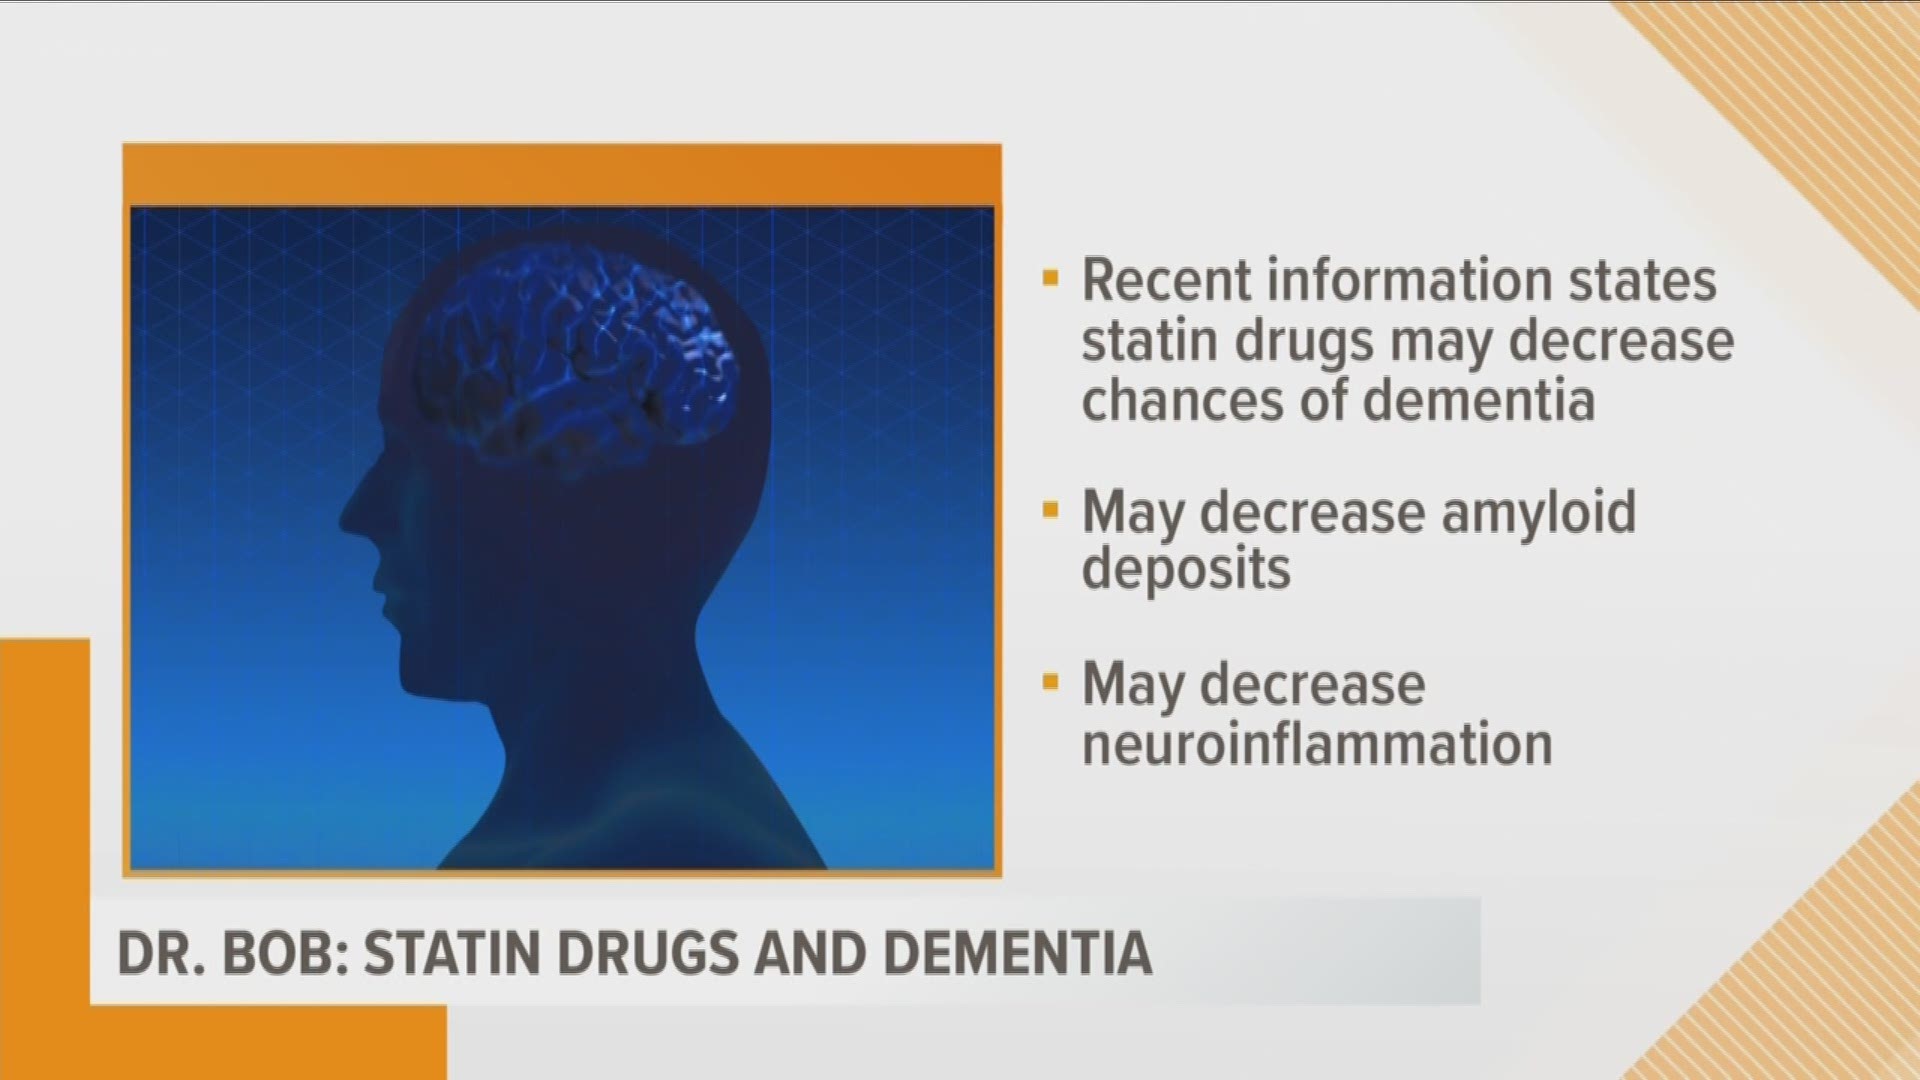 Dr. Bob talks about how statin drugs can help elderly adults after they've suffered a fall.